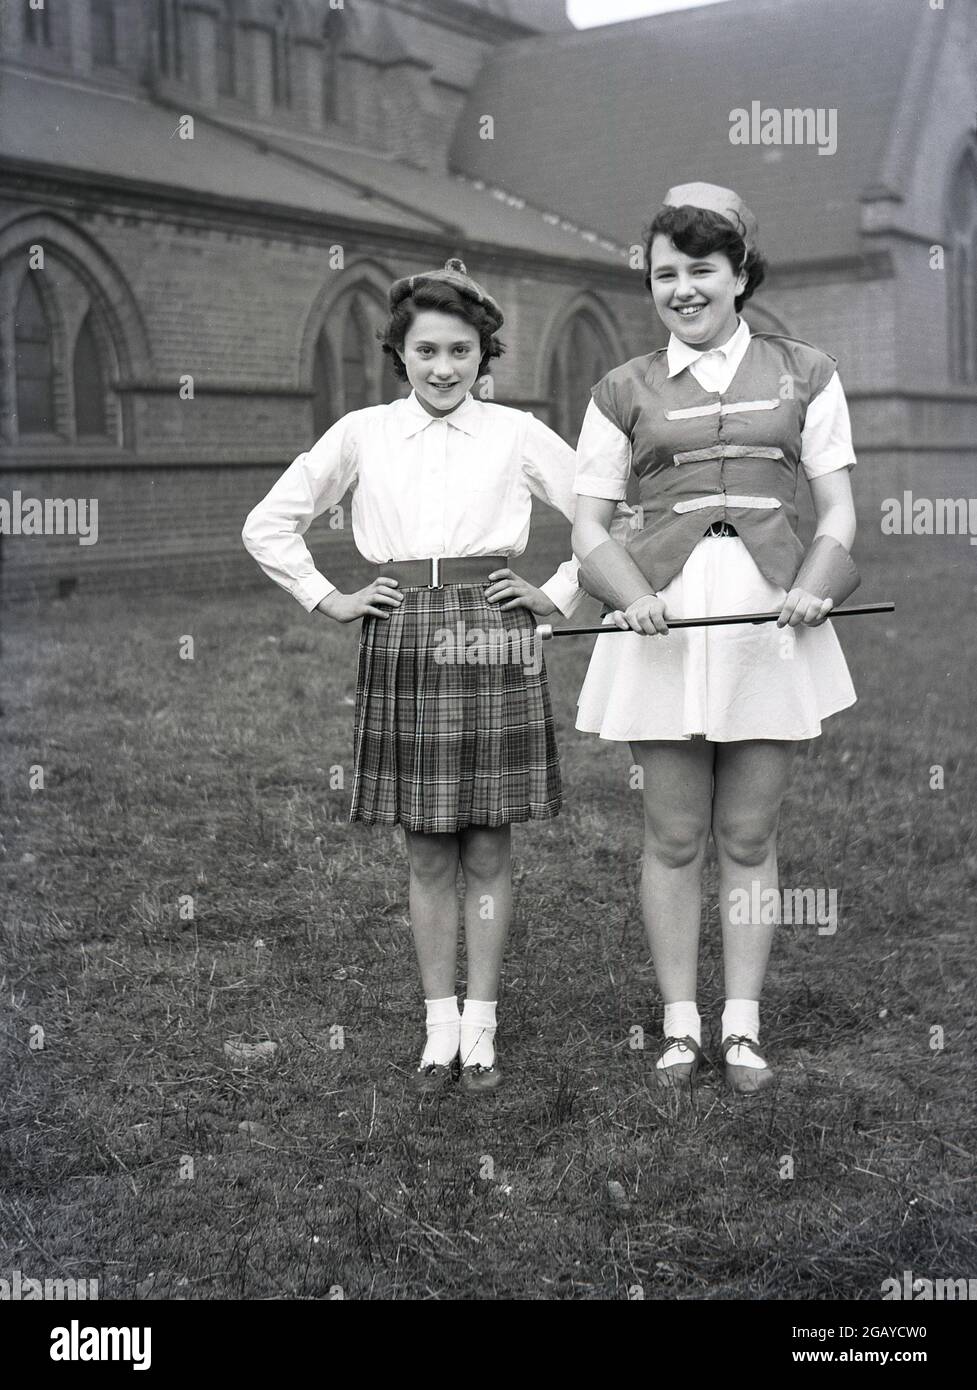 1956, historical, outside in the grounds of a church, two girls standing in their costumes for the May Day Carnval, Leeds, England, UK. Stock Photo